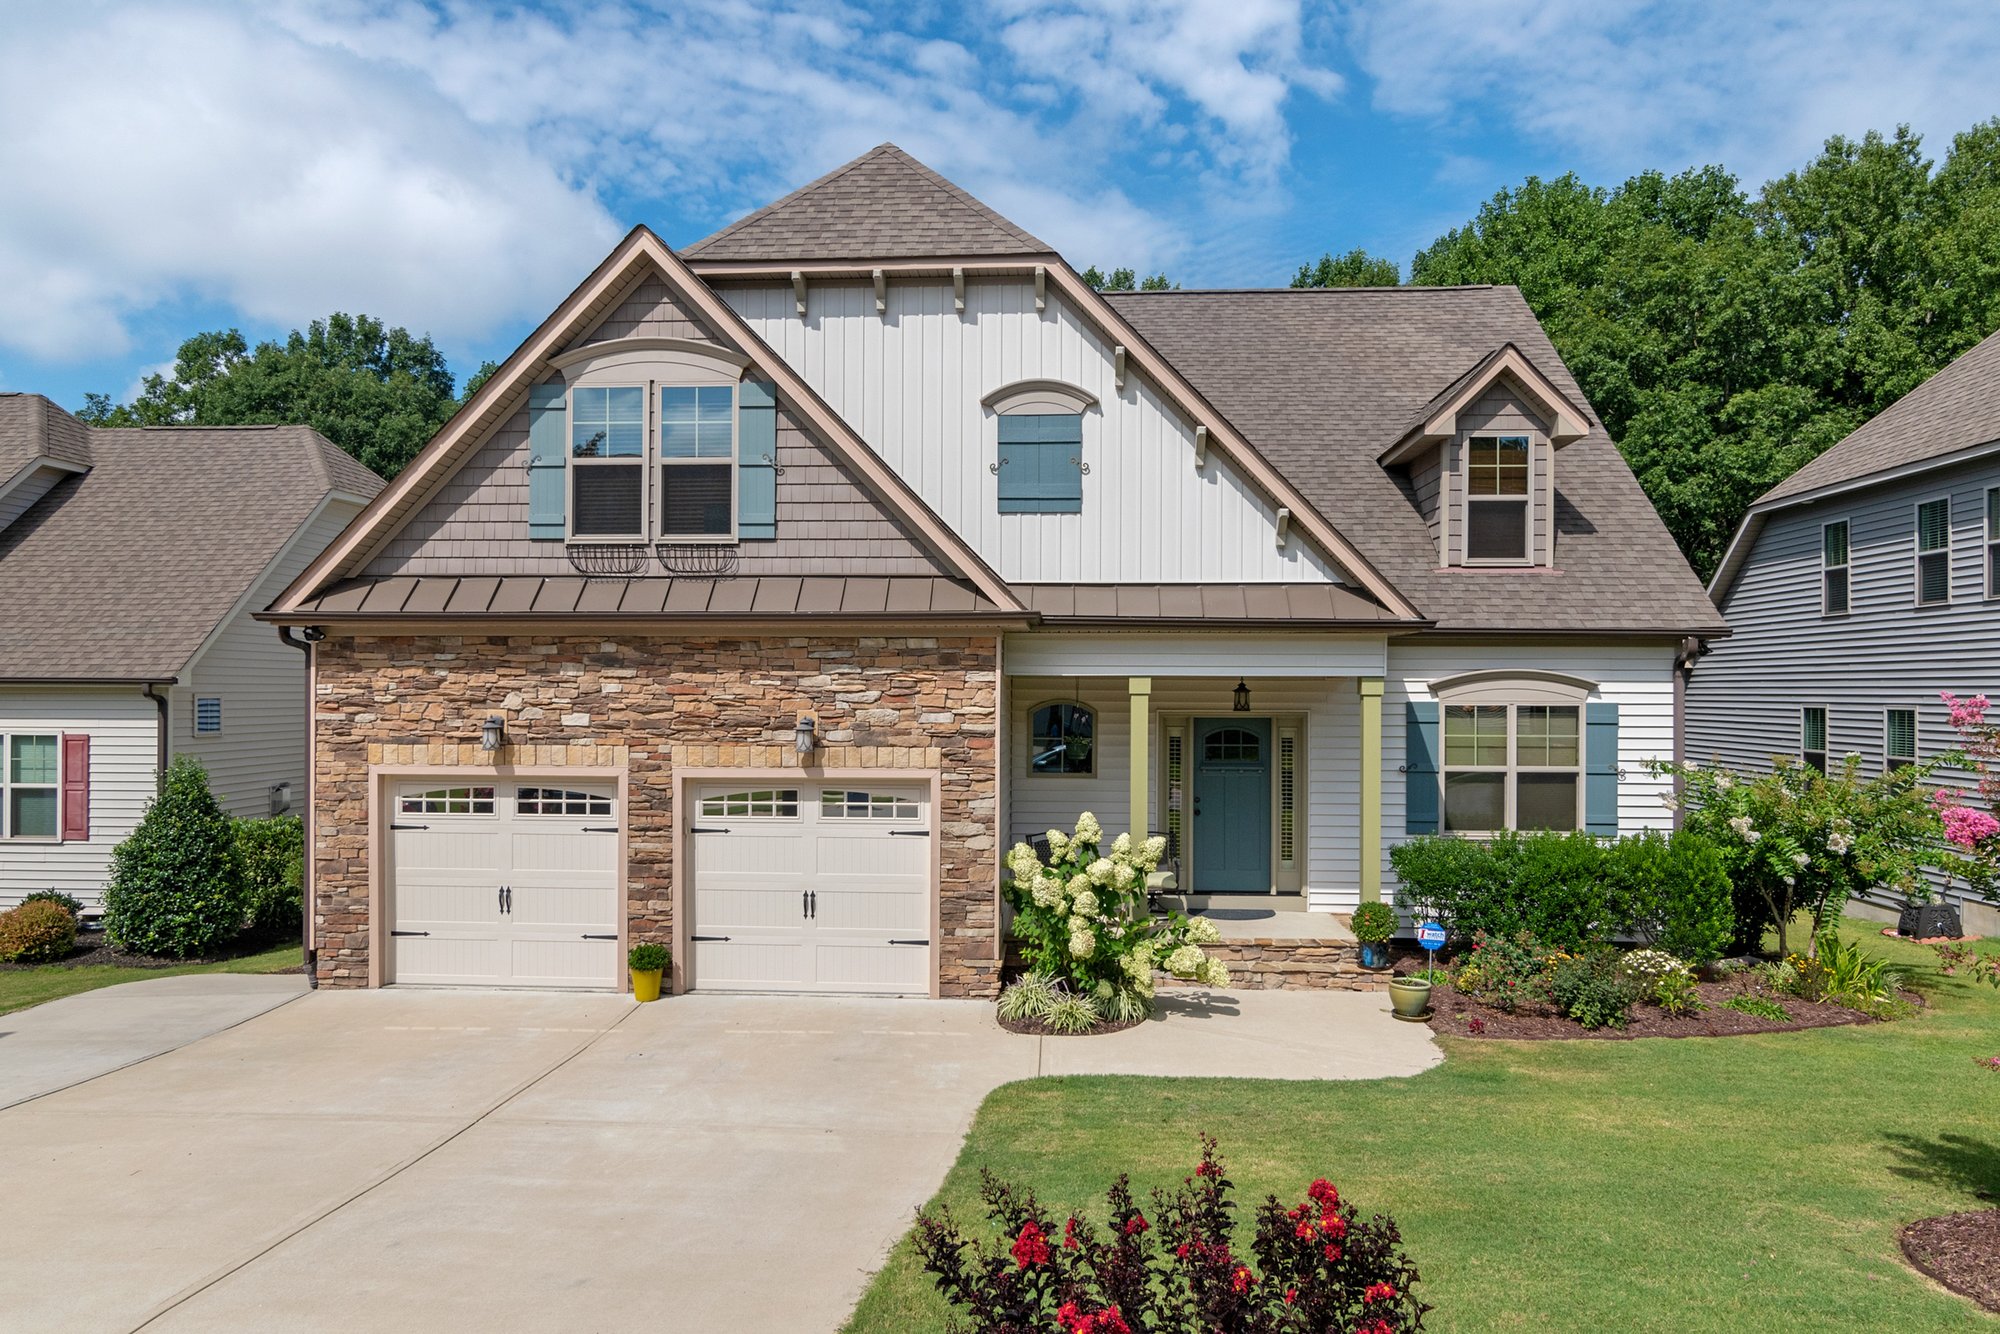 Clean and tidy curb appeal of a home | Spyglass Realty